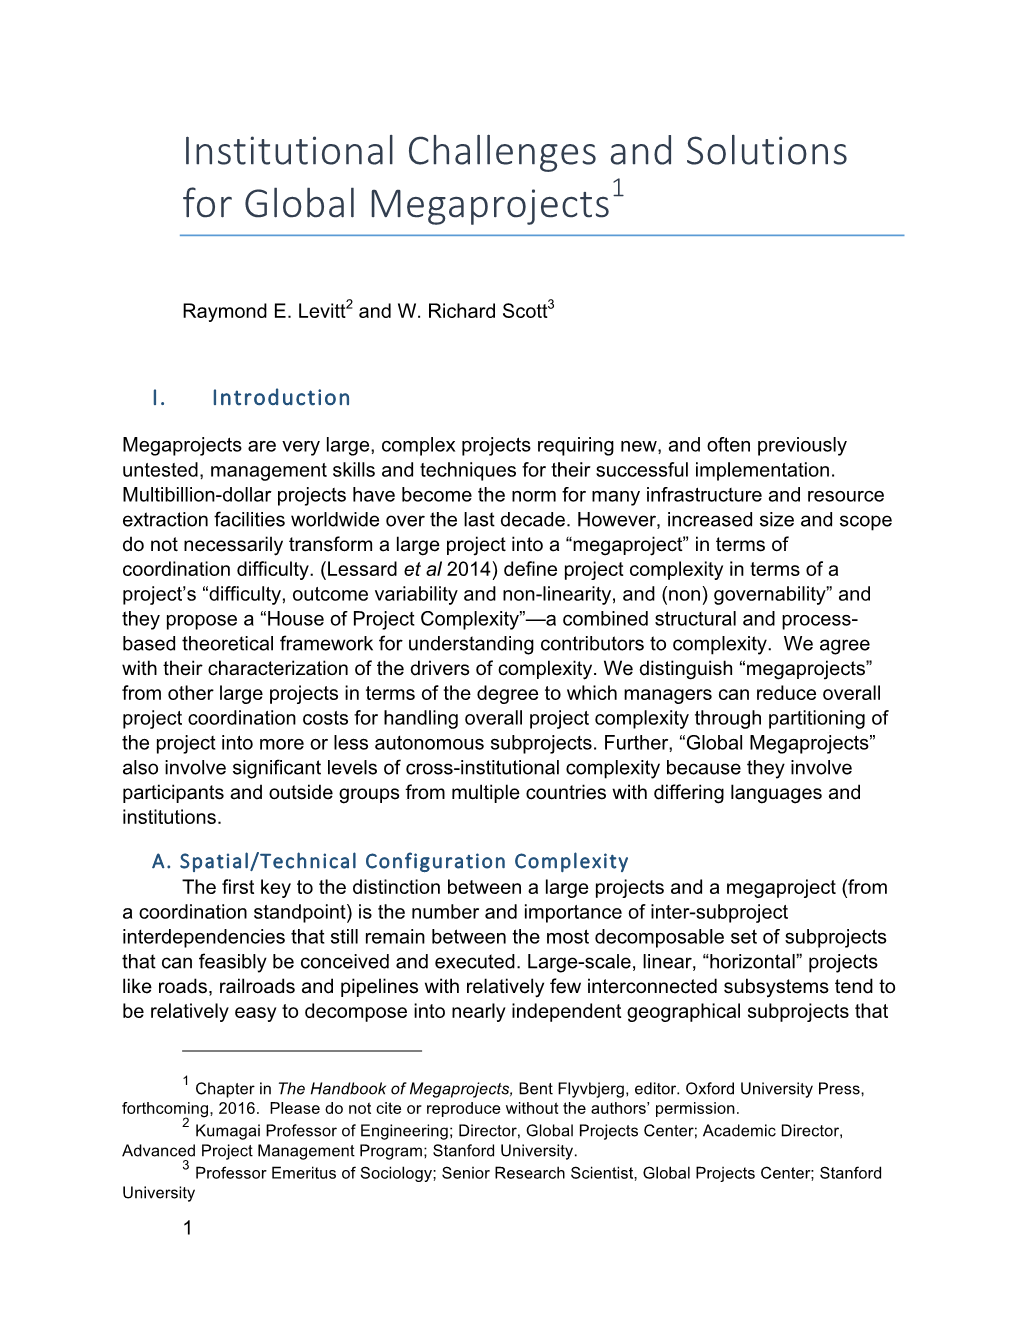 Institutional Challenges and Solutions for Global Megaprojects1